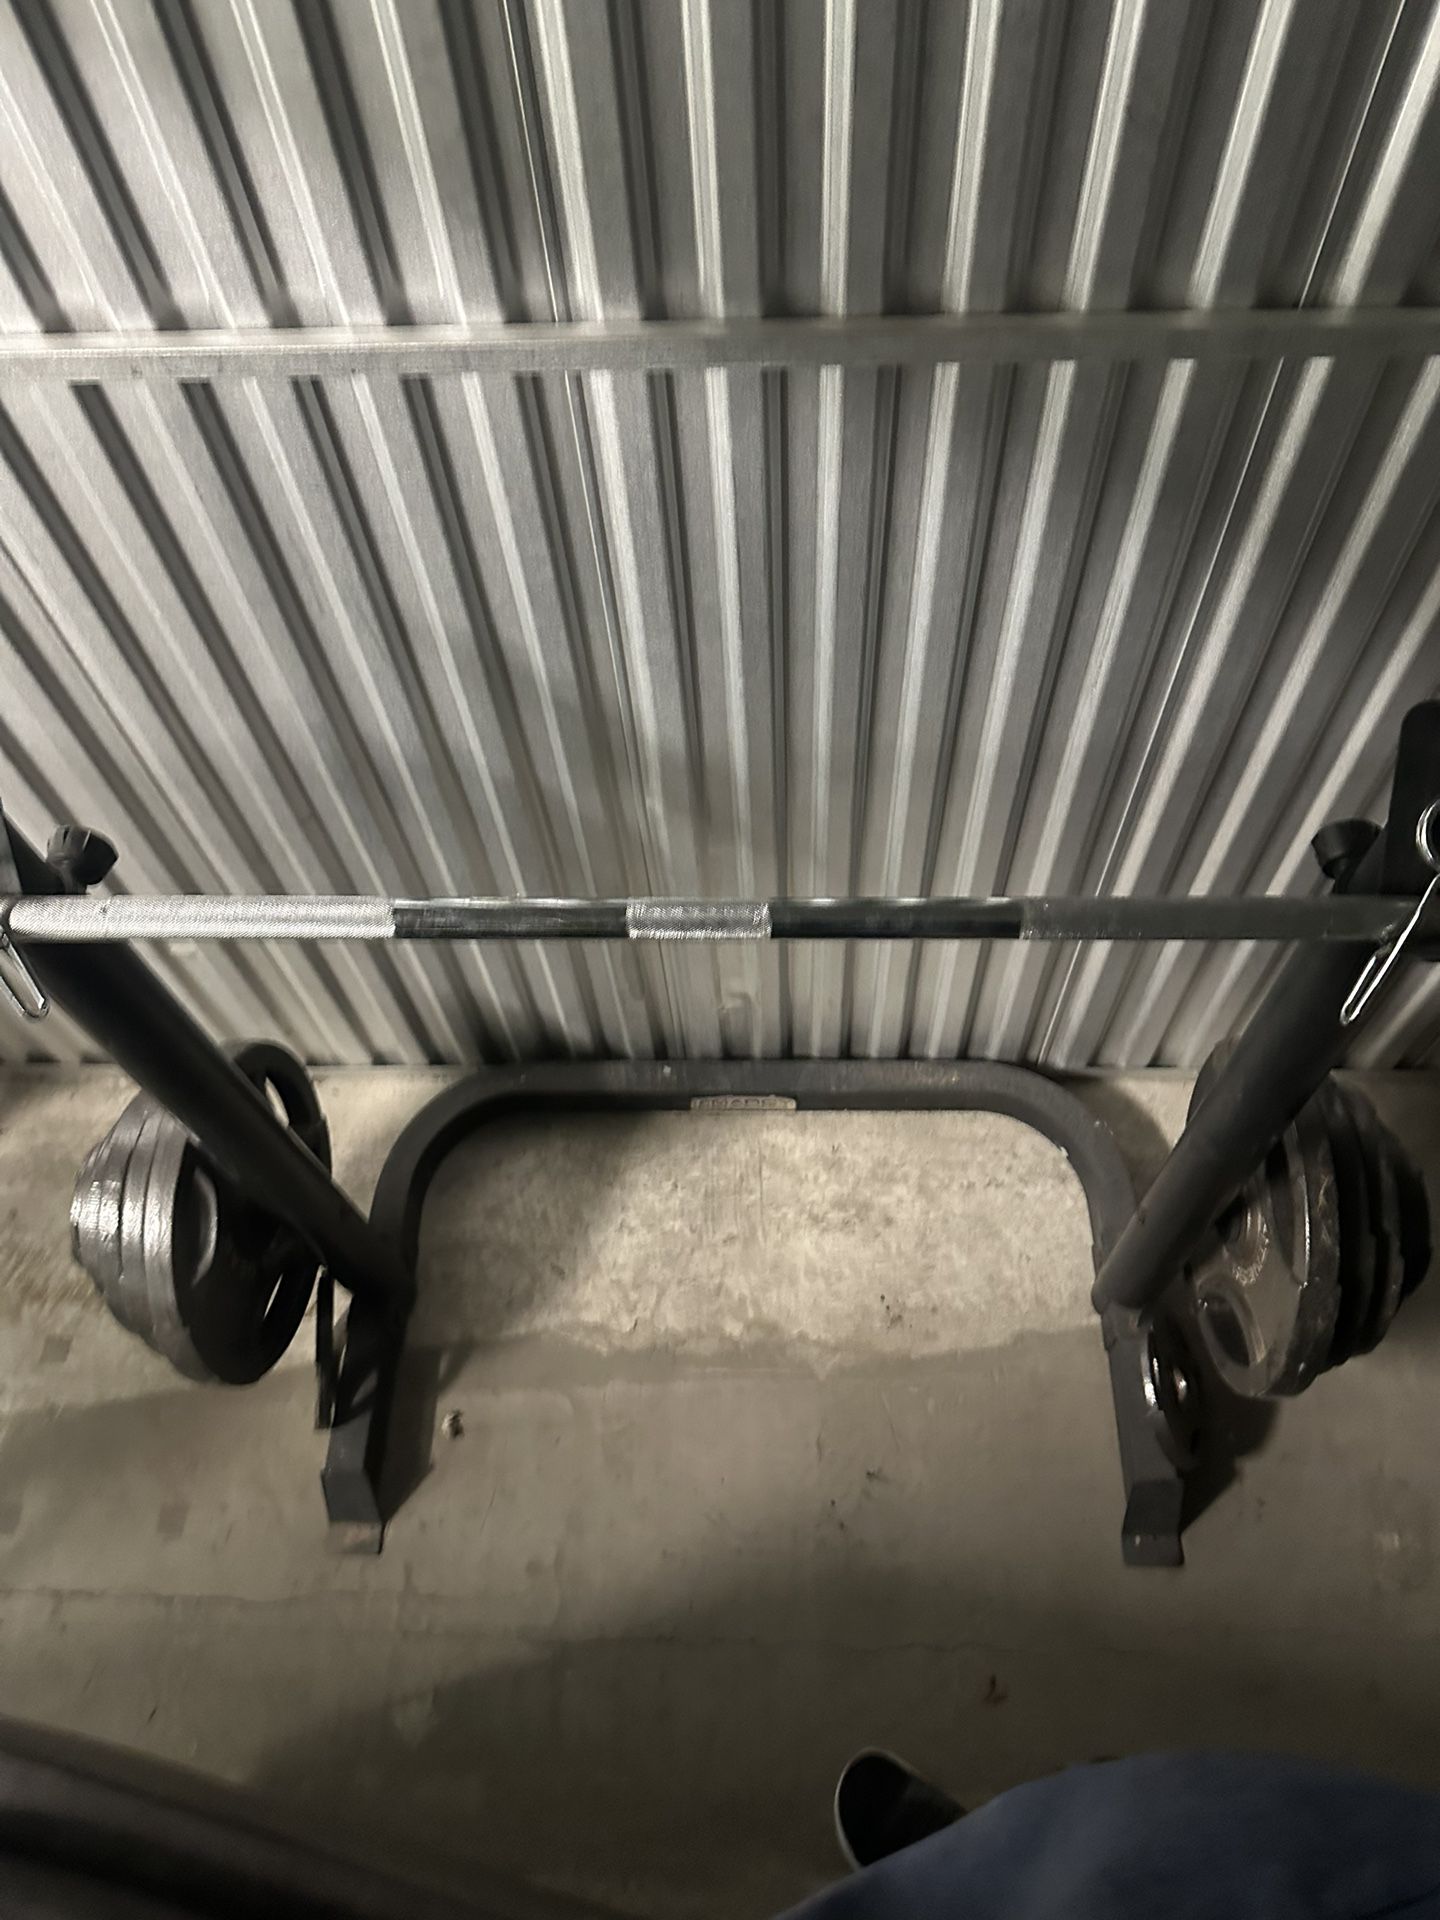 Olympic Barbell/Squat Rack/300lbs Weight/Adjustable Bench